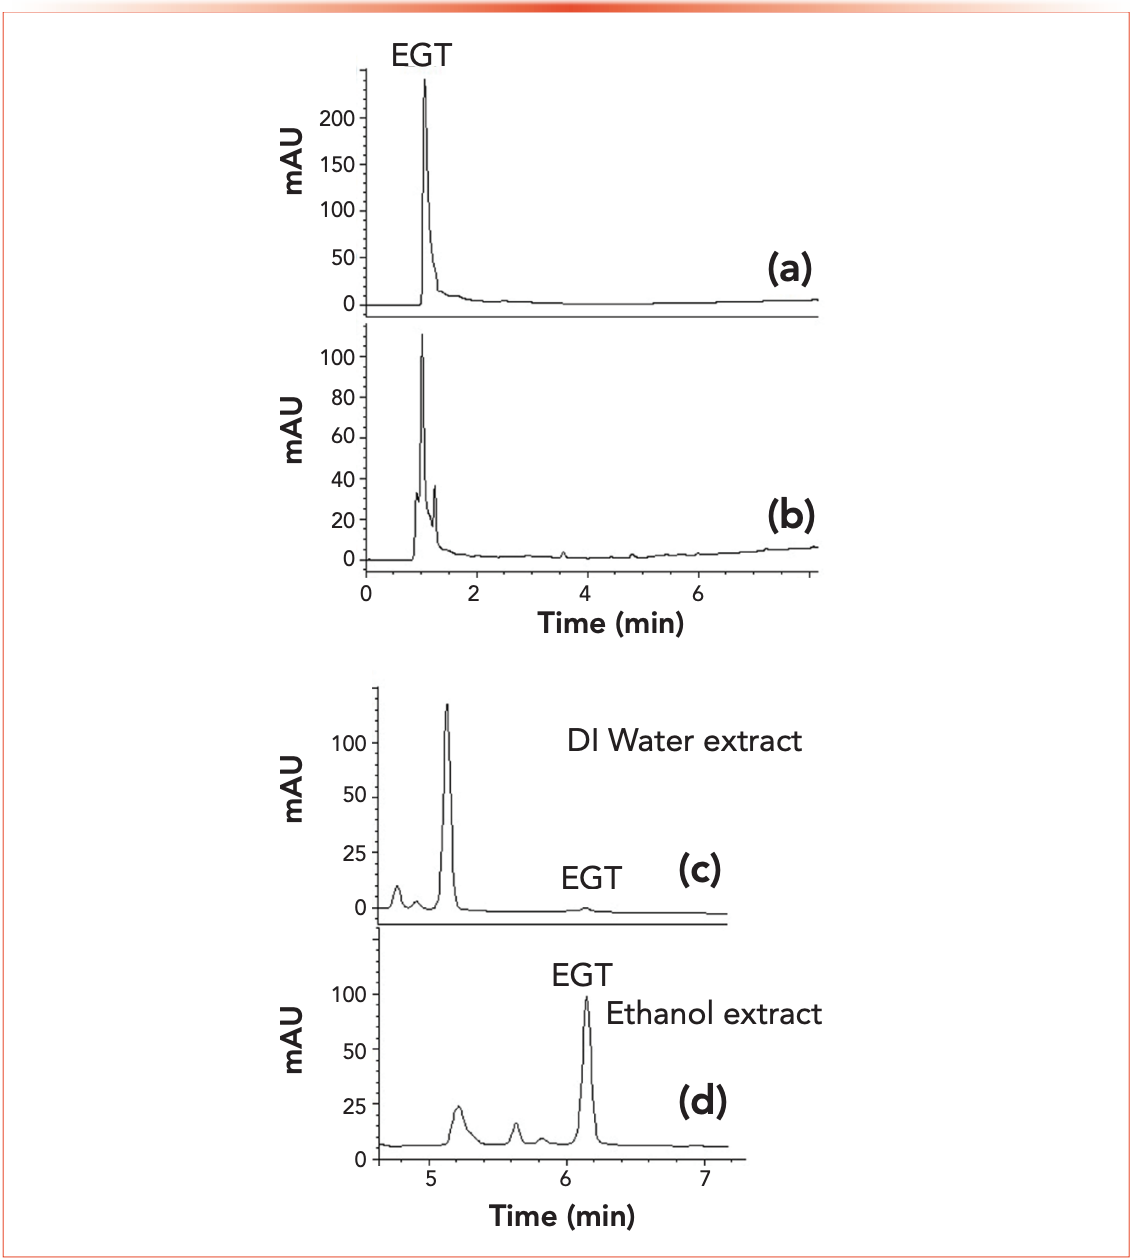 Figure 2: Analysis of ergothioneine (EGT) during method development. (a) EGT standard on C18 column, 90% deionized water:0.1% formic acid, and (b) analysis of shiitake mushroom extract on C18 column, 90% deionized water:0.1% formic acid, and (c) analysis of mushroom sample using water extraction procedure, optimized method on diamond hydride (DH) with aqueous normal phase (ANP) gradient, and (d) analysis of mushroom sample using ethanol extraction procedure optimized method on DH (ANP gradient). Note: x-axis label is Time (min), and y-axis label is Absorbance (mAU).